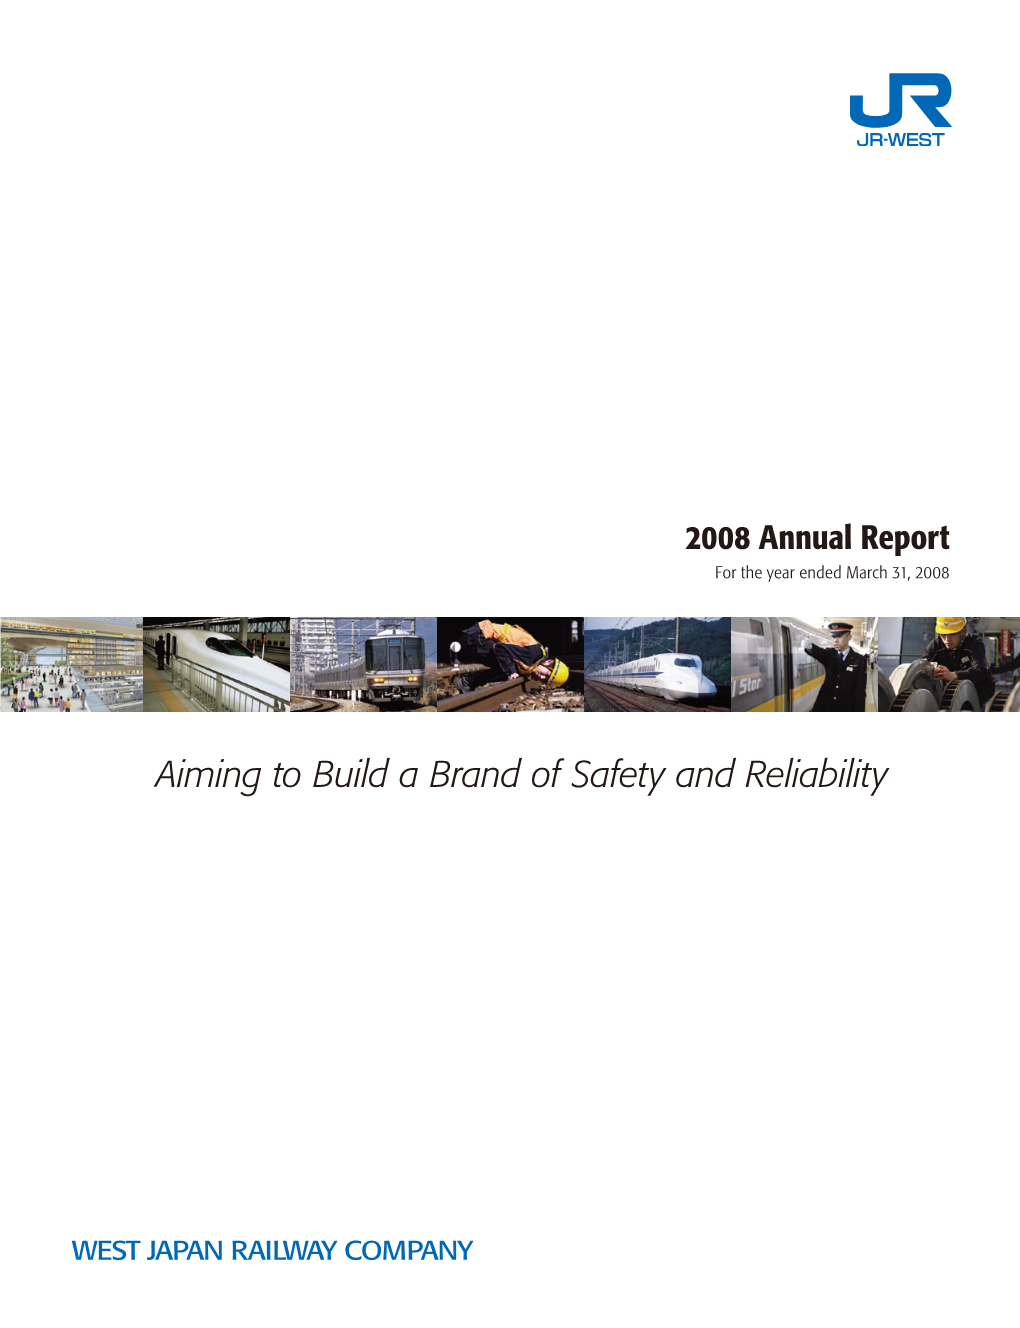 2008 Annual Report for the Year Ended March 31, 2008